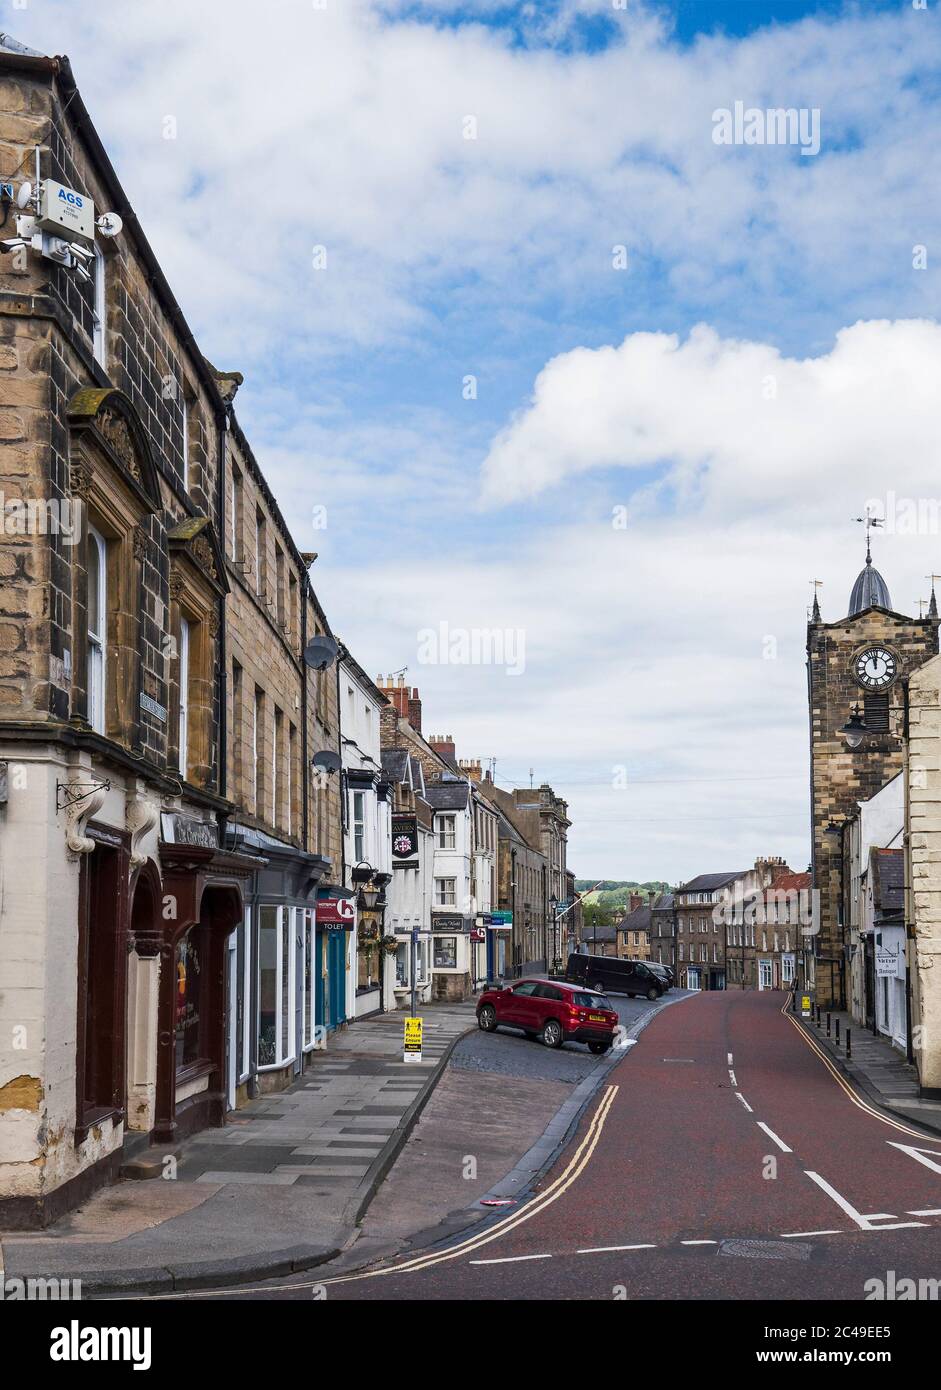 Quiet streets of a usually vibrant market town, Alnwick, Northumberland, Uk and a 2m social distancing sign during the 2020 coronavirus pandemic. Stock Photo